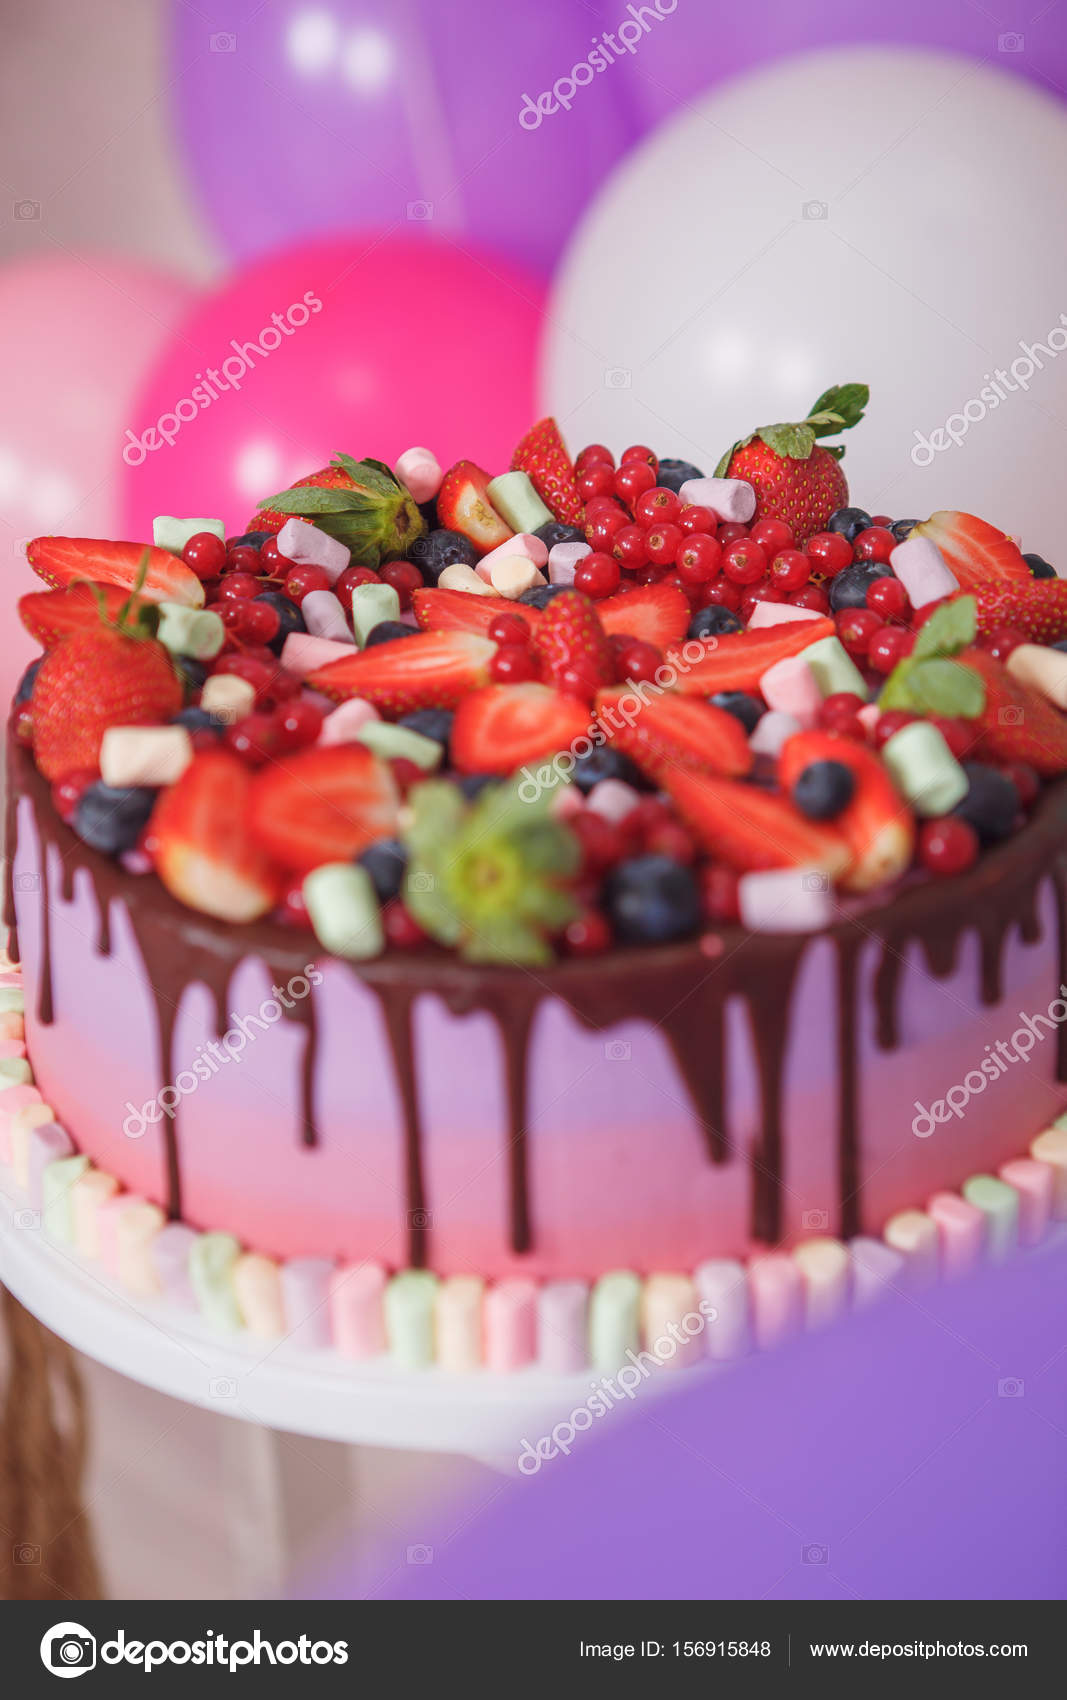 Images Fruits Decoration For Party Fruit Cake Birthday